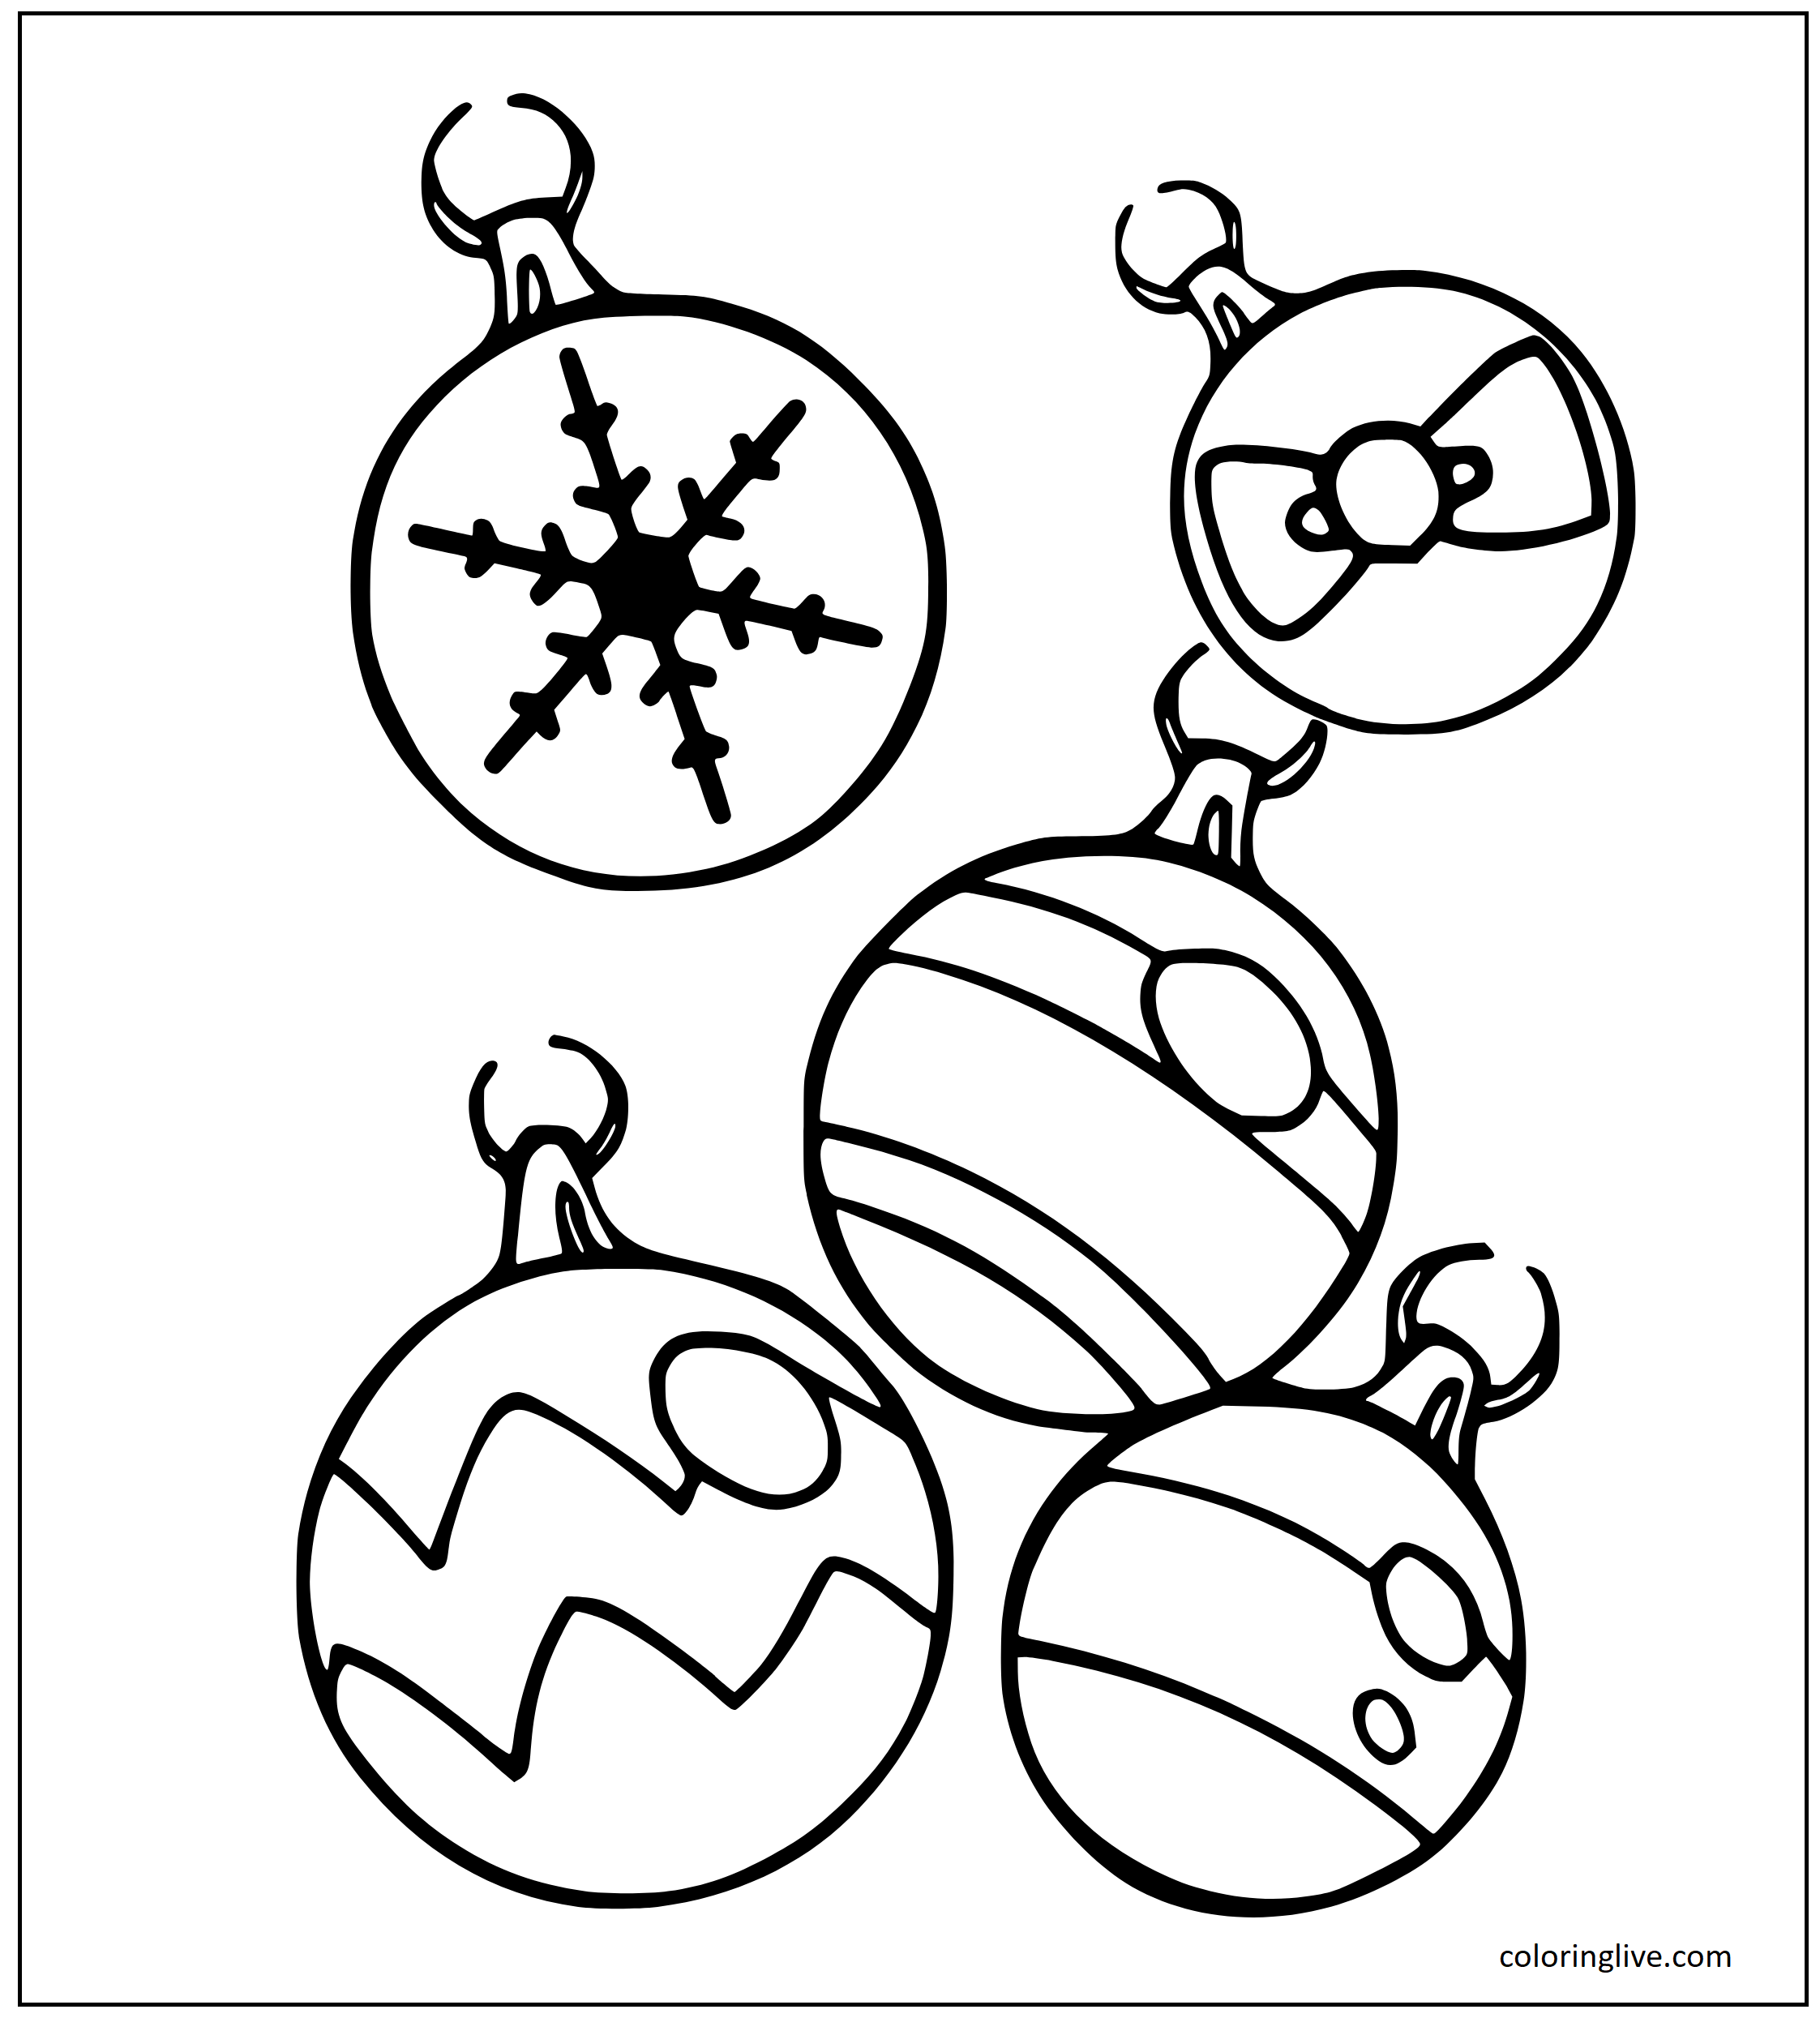 Printable Christmas Ornaments to color Coloring Page for kids.